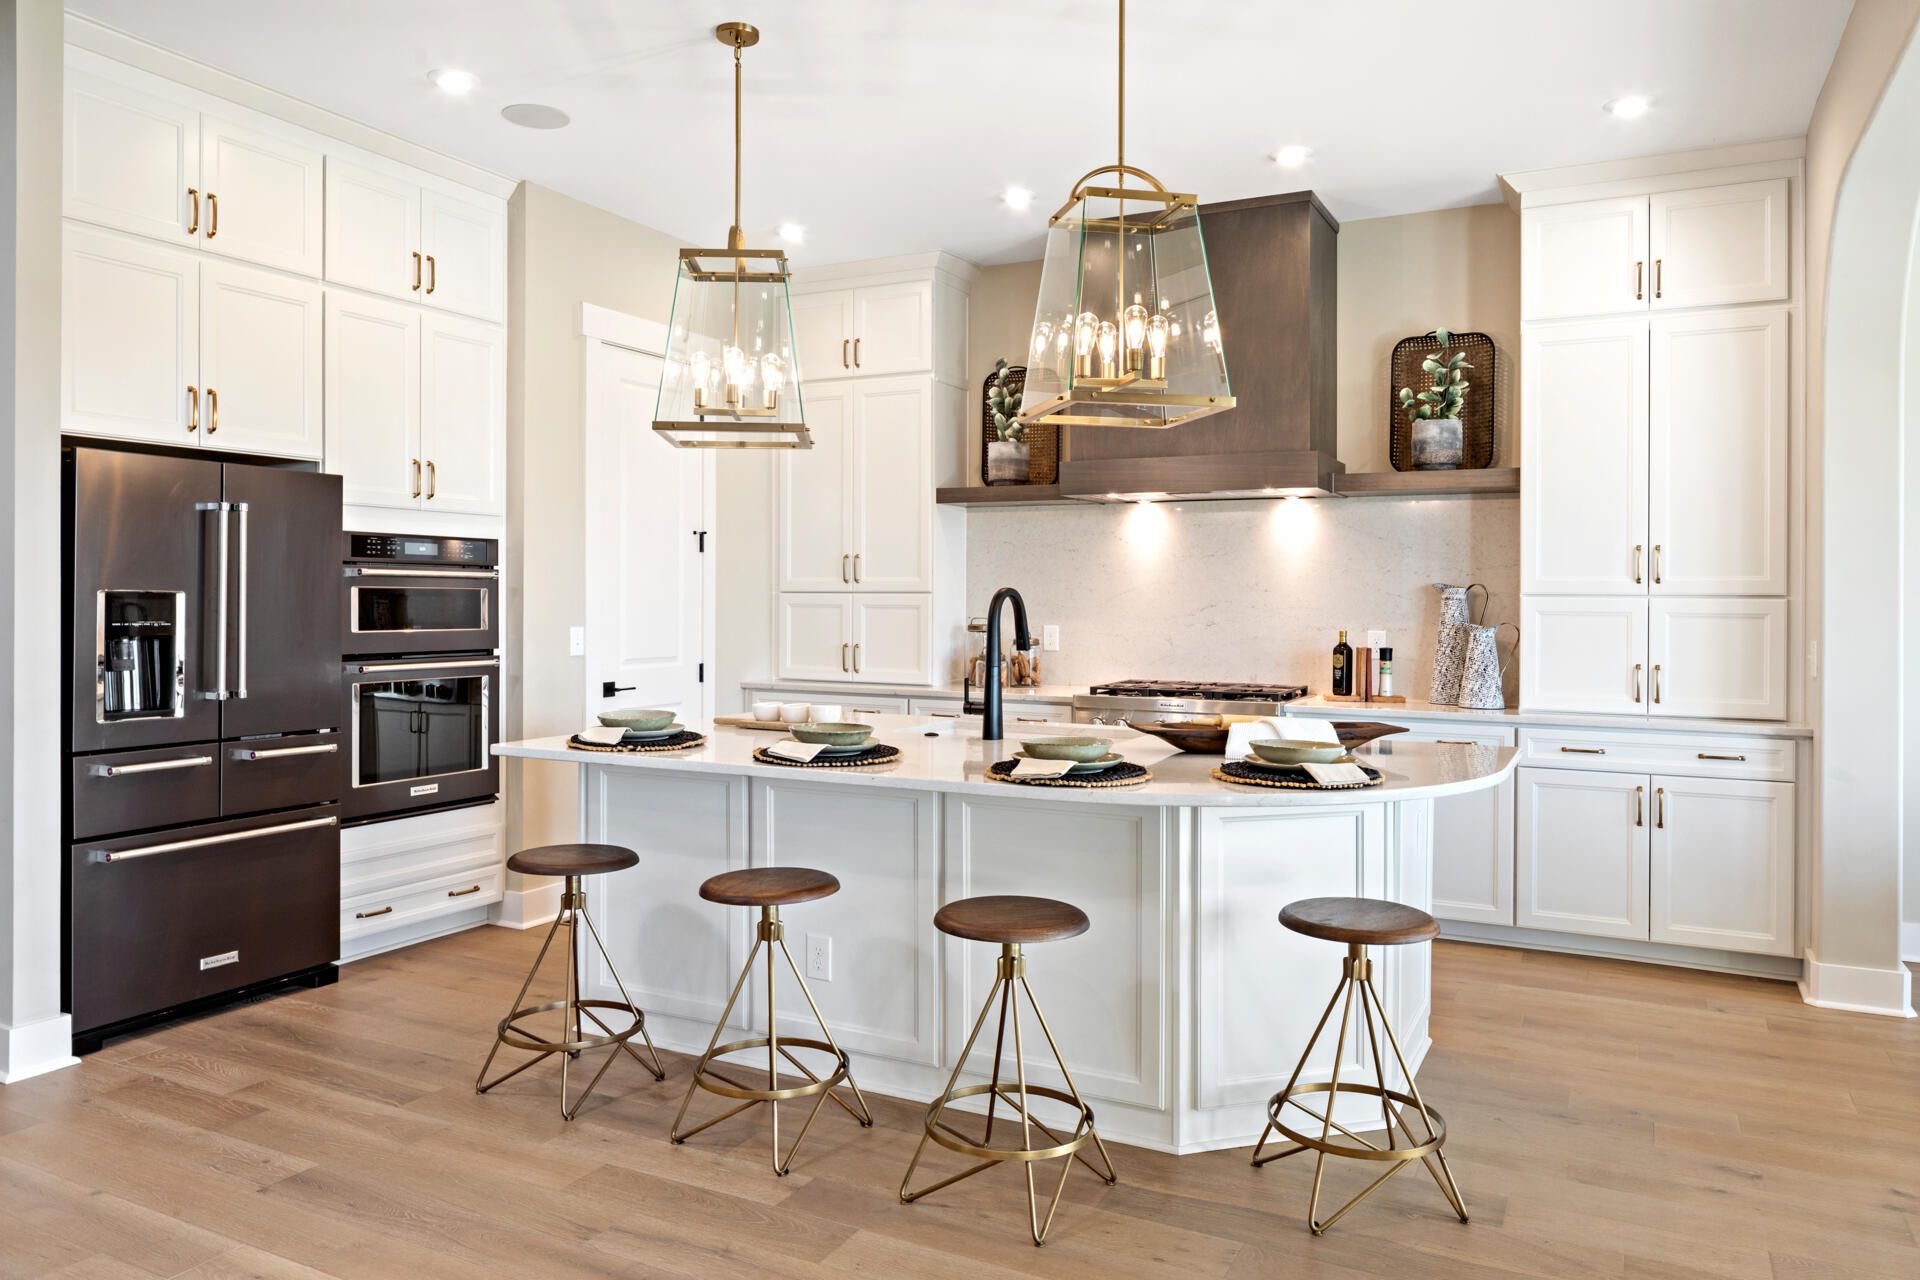 18 Kitchen Trends These Are the Kitchen Trends You'll Be Seeing ...